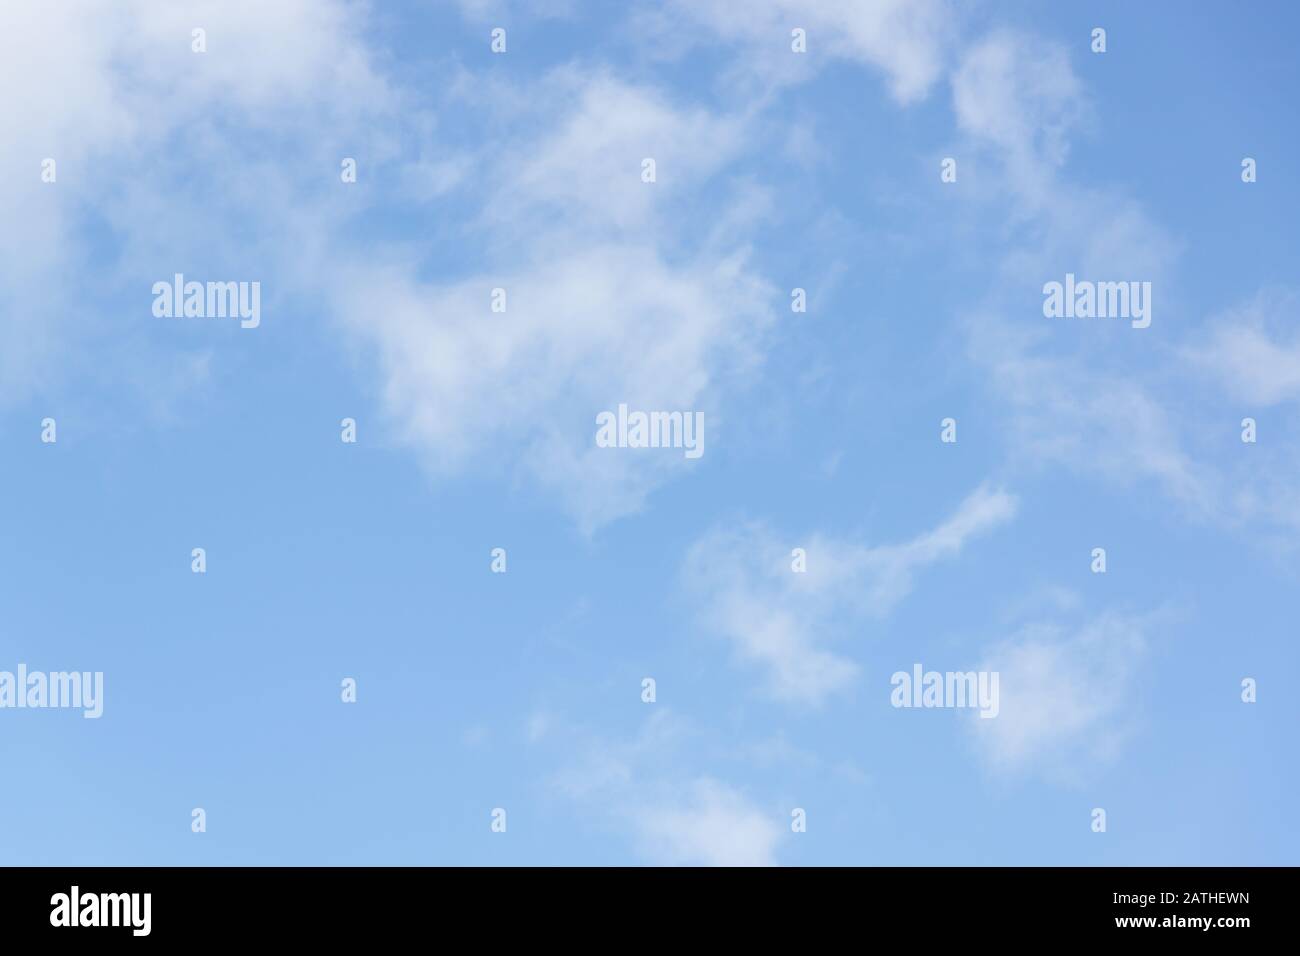 Hazy blue summer sky with whispy white cumulus clouds Stock Photo